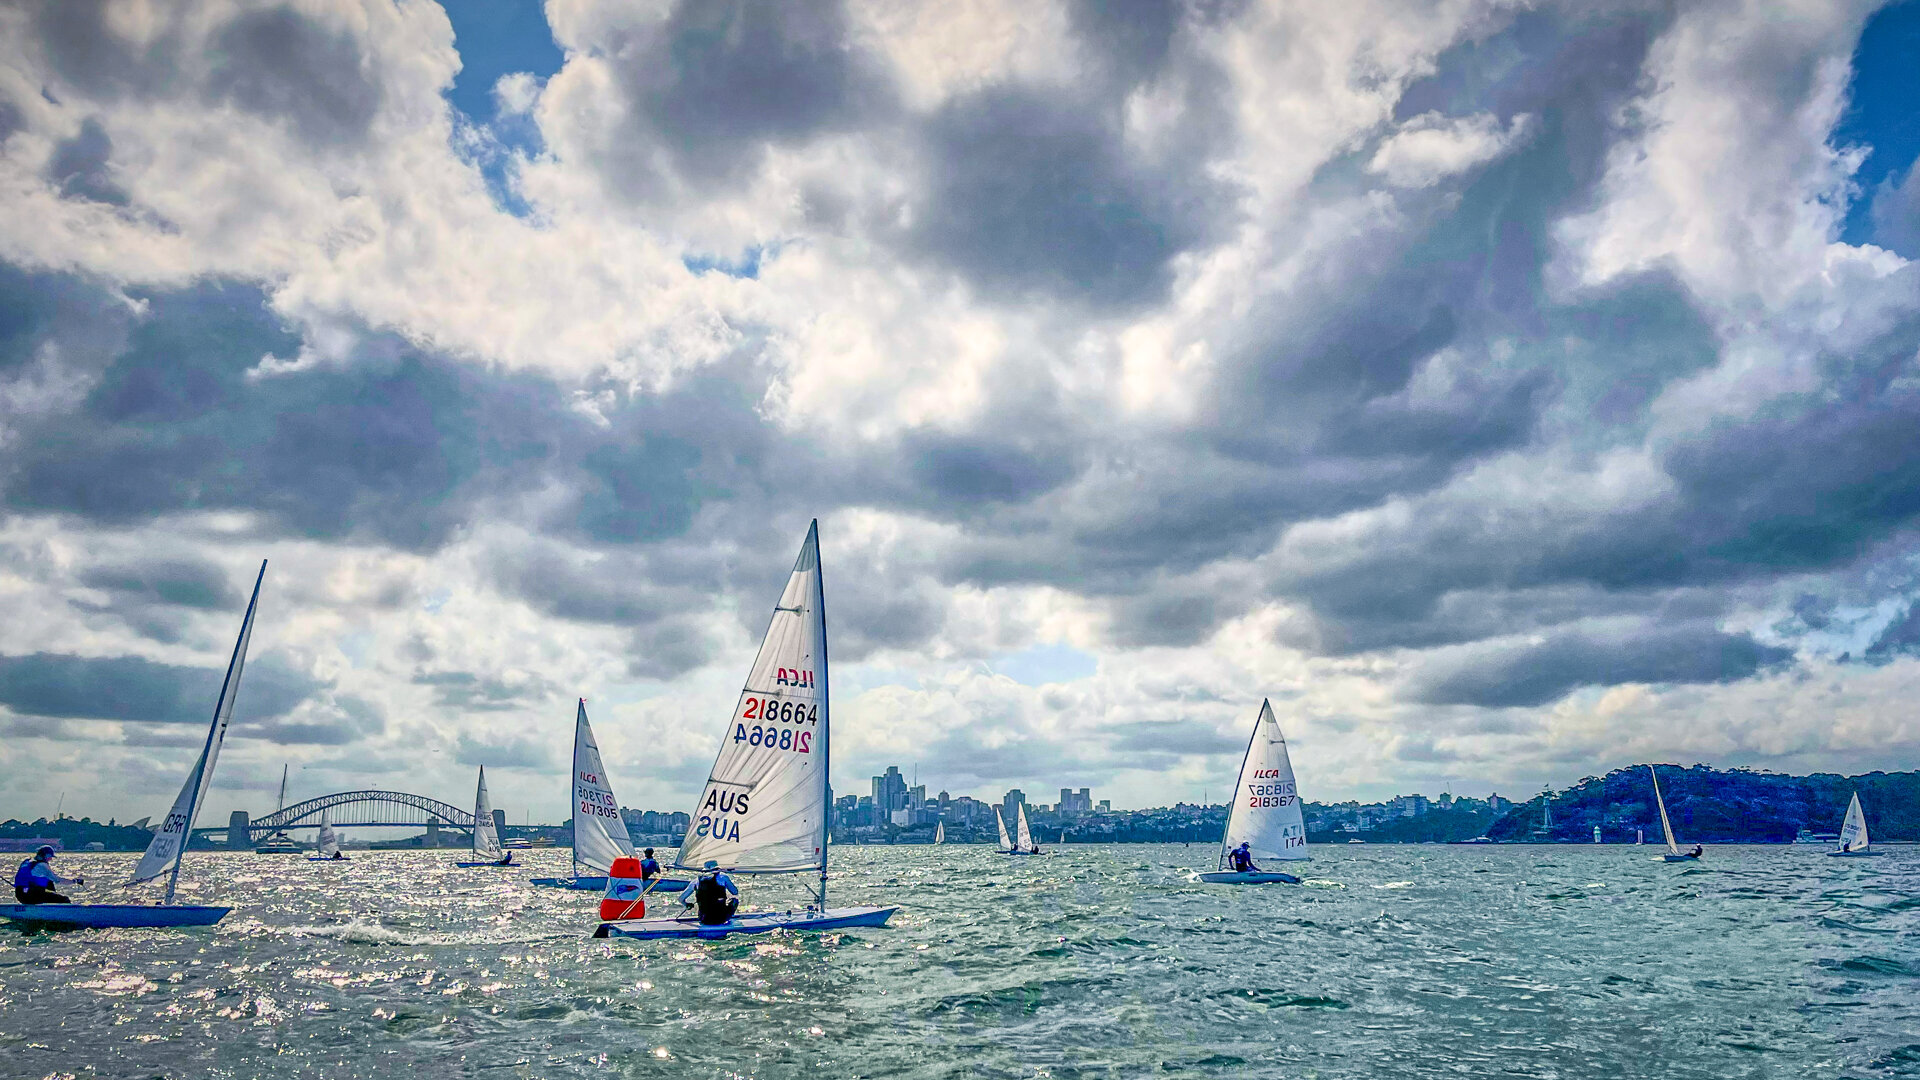 ILCA World Masters prep in Sydney Harbour this week for DBSC sailors and visitors from Italy, Canada, America, and Great Britain. Thanks to the legendary Mark Bethwaite for coordinating, with help from DBSC members including race management, on-water